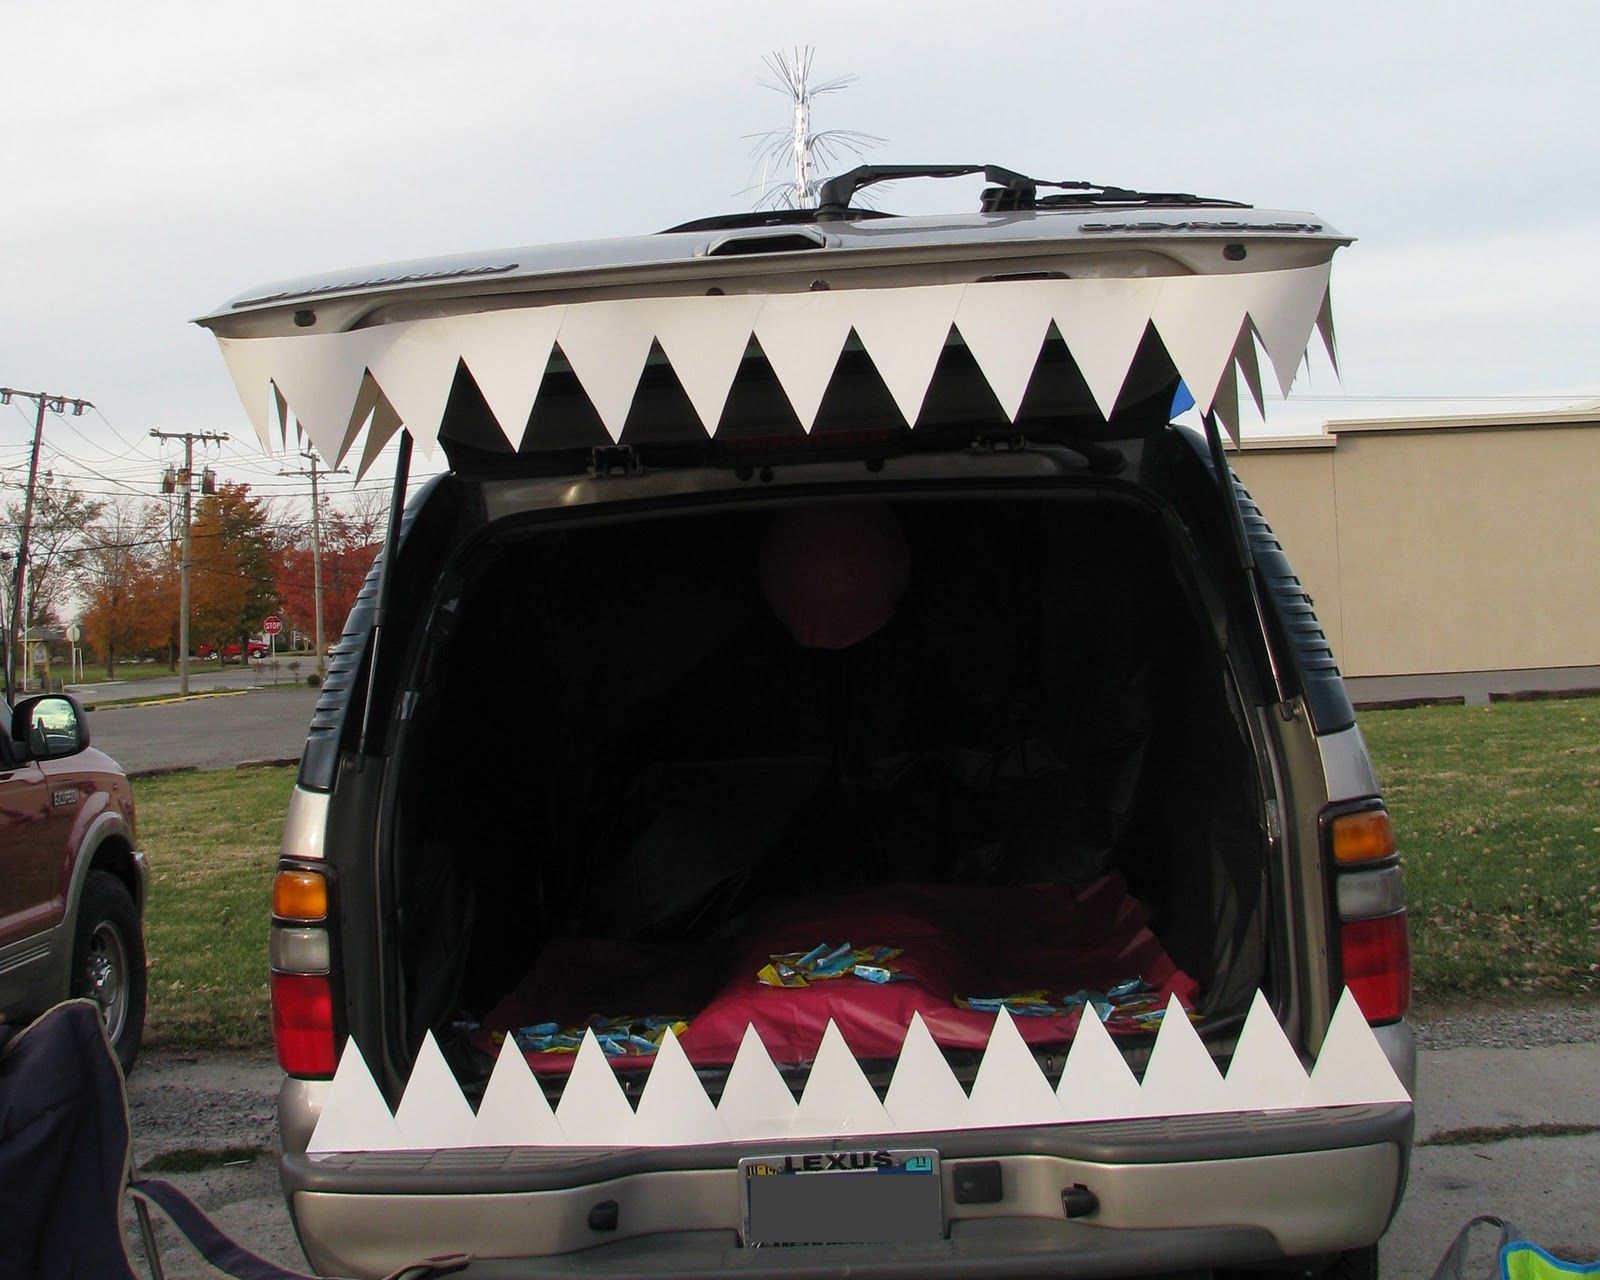 Monster car. Fun for "Trunk or Treating"!